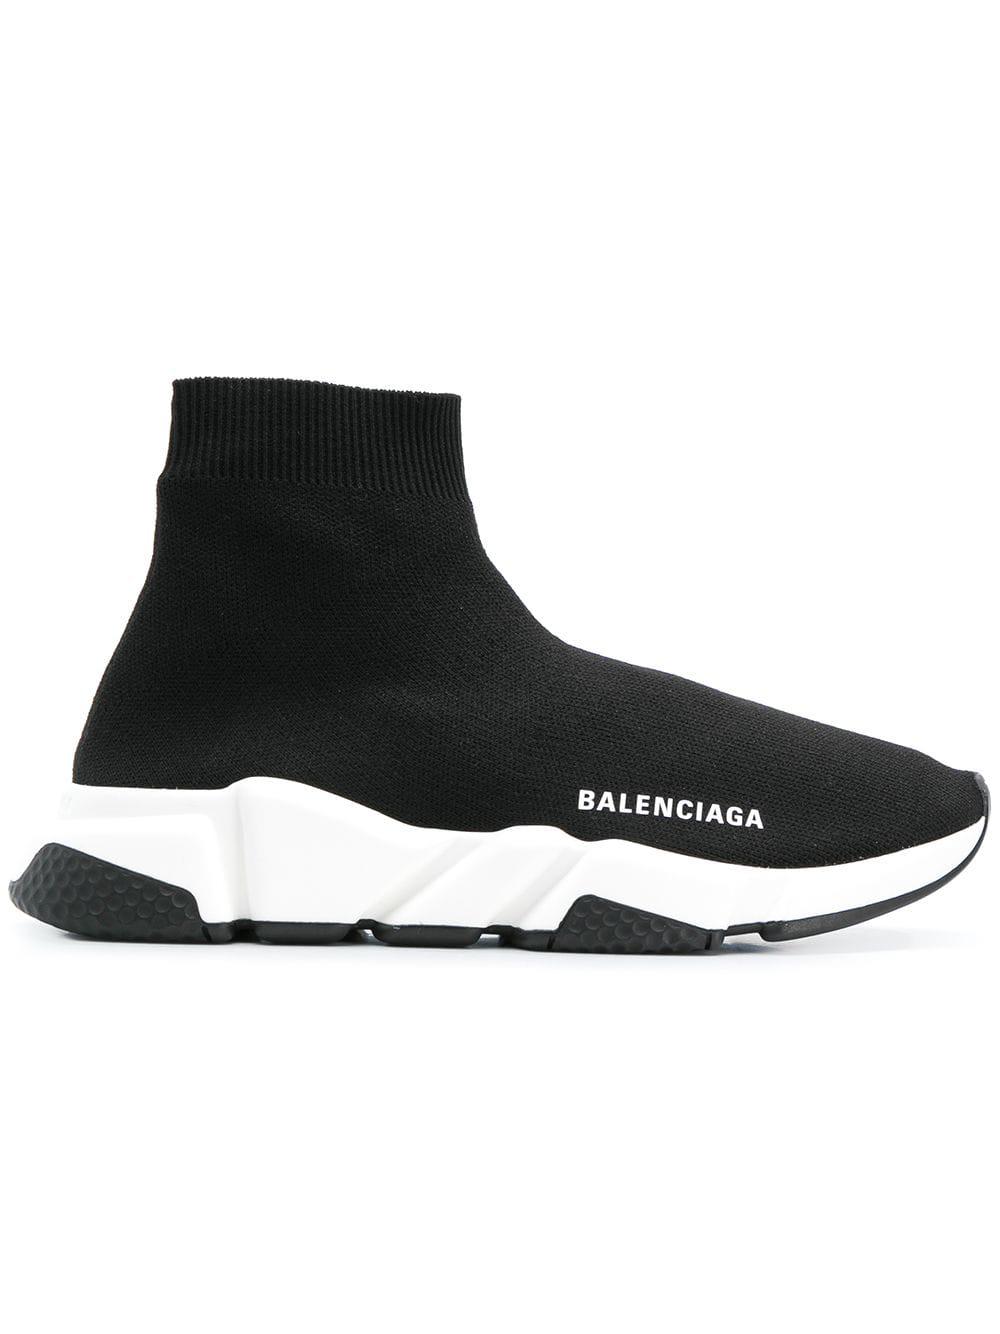 Balenciaga Speed Knitted Sneakers in Black - Save 12% - Lyst